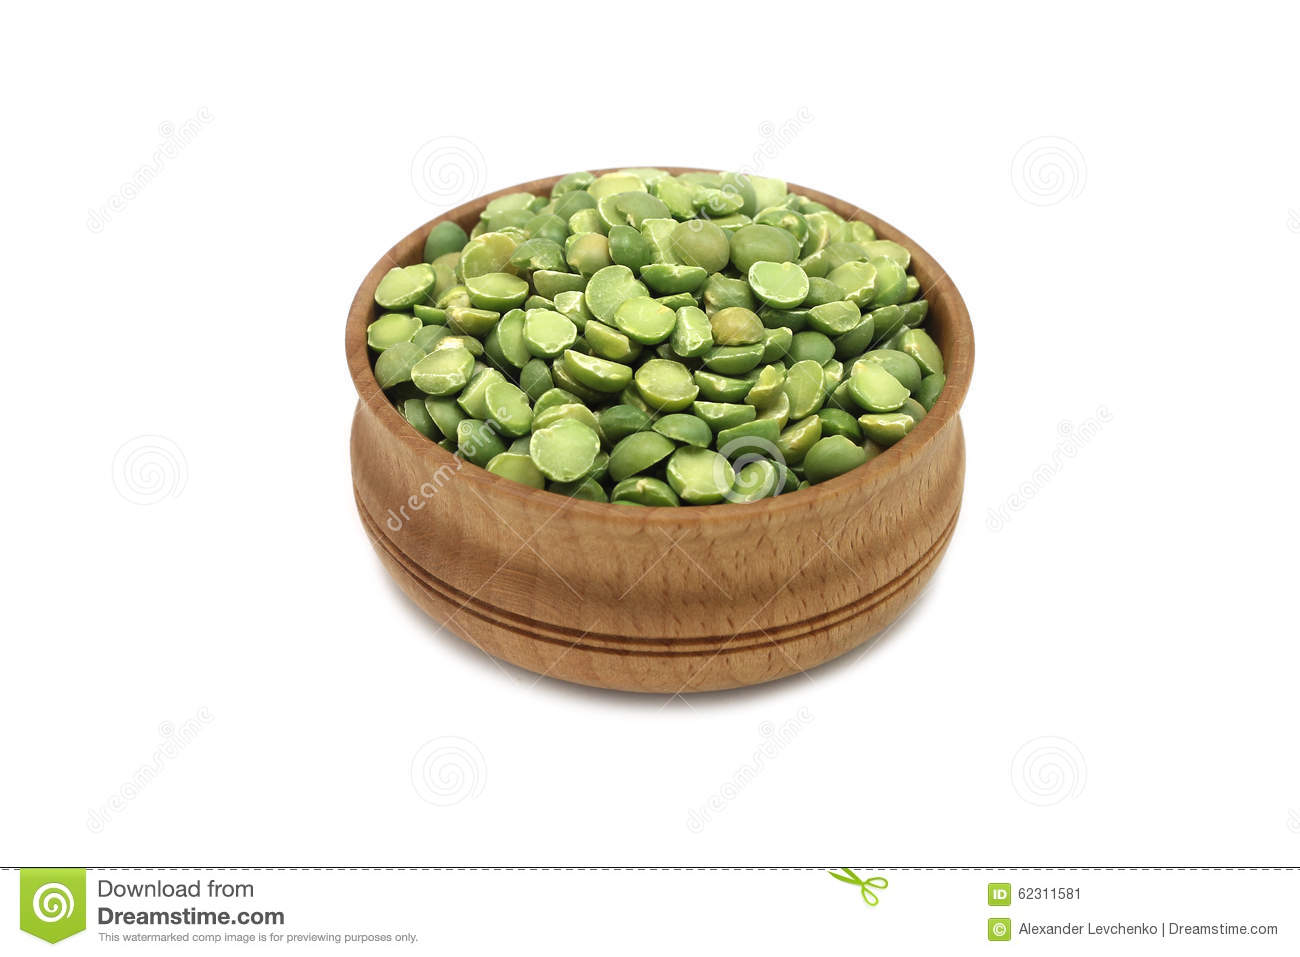 Dried Green Peas In A Wooden Bowl On A White Background